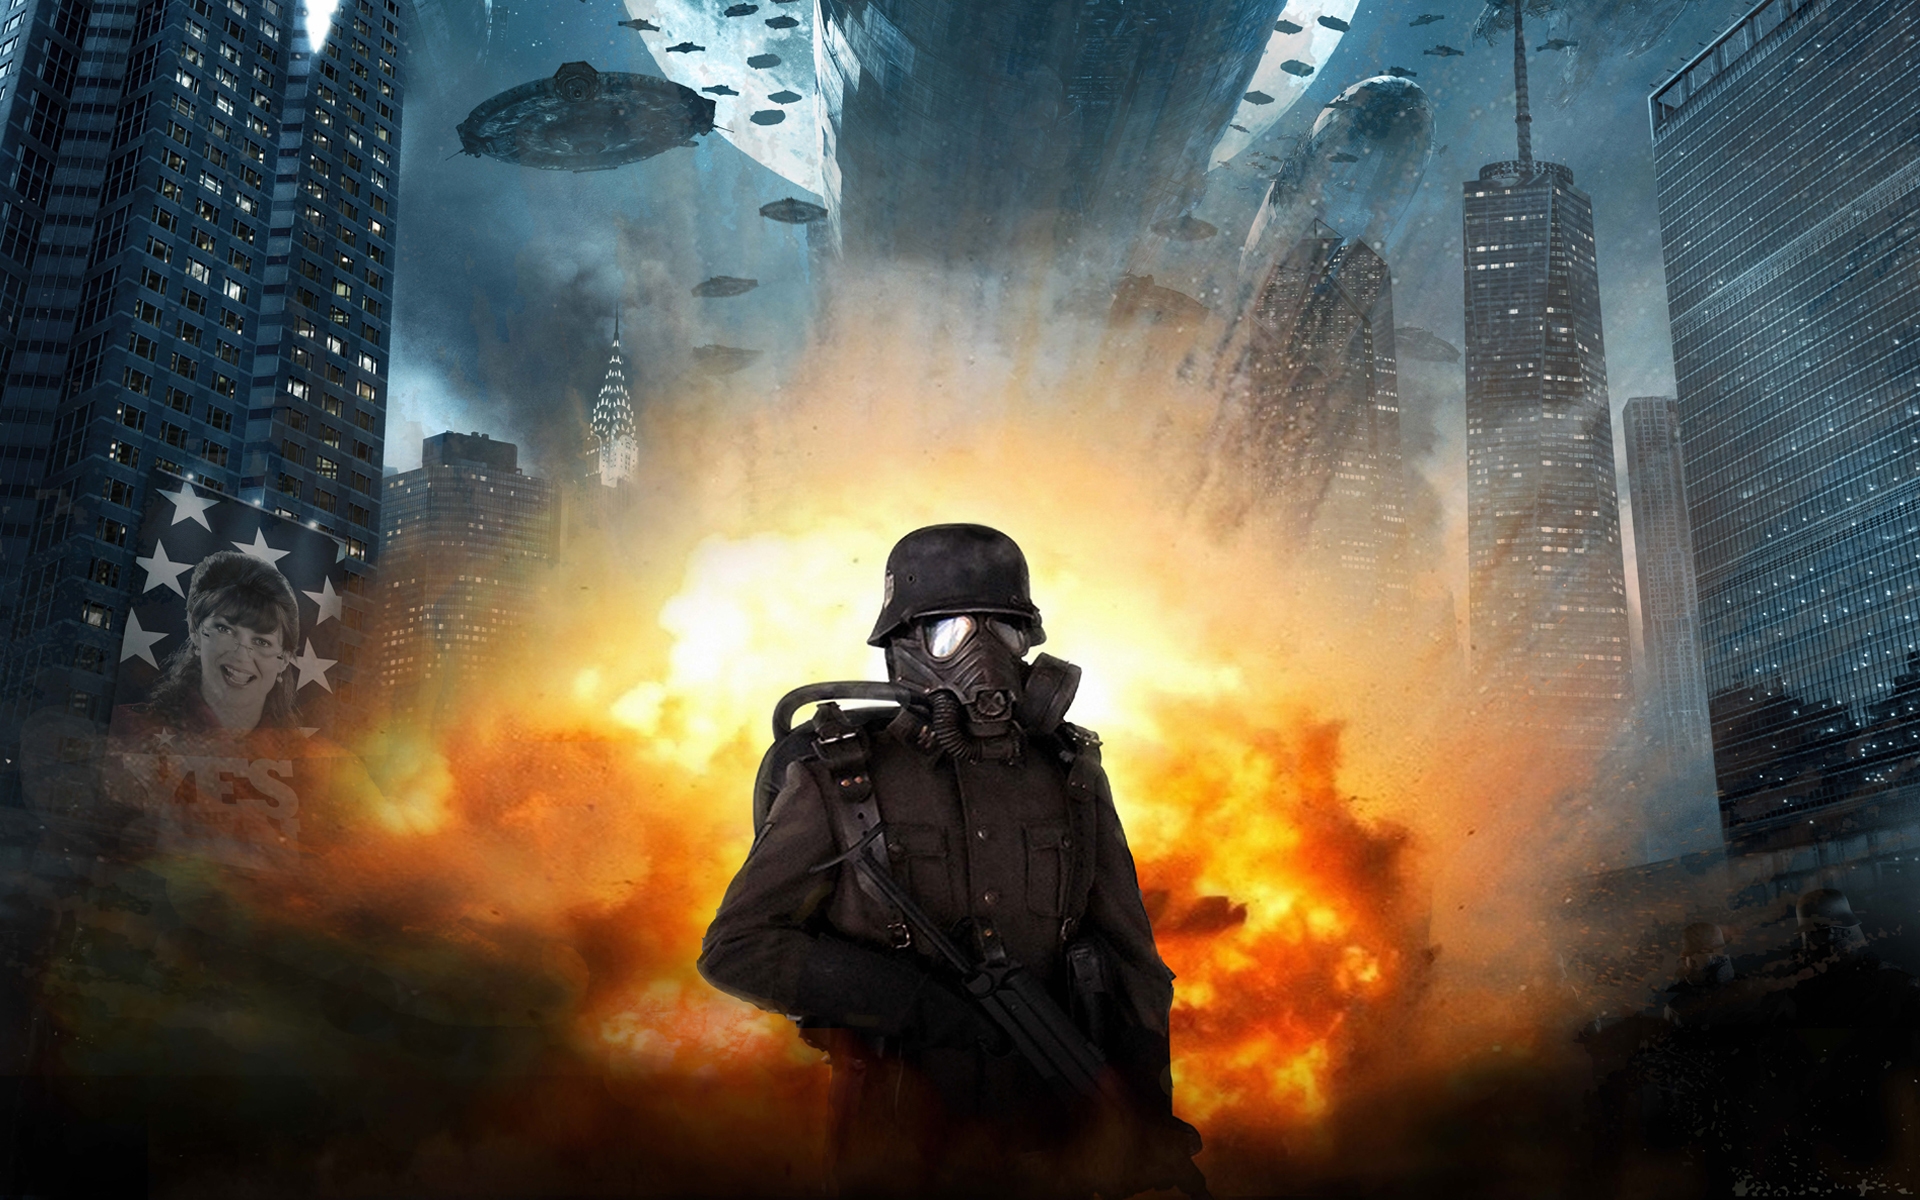 Iron Sky Soldier for 1920 x 1200 widescreen resolution